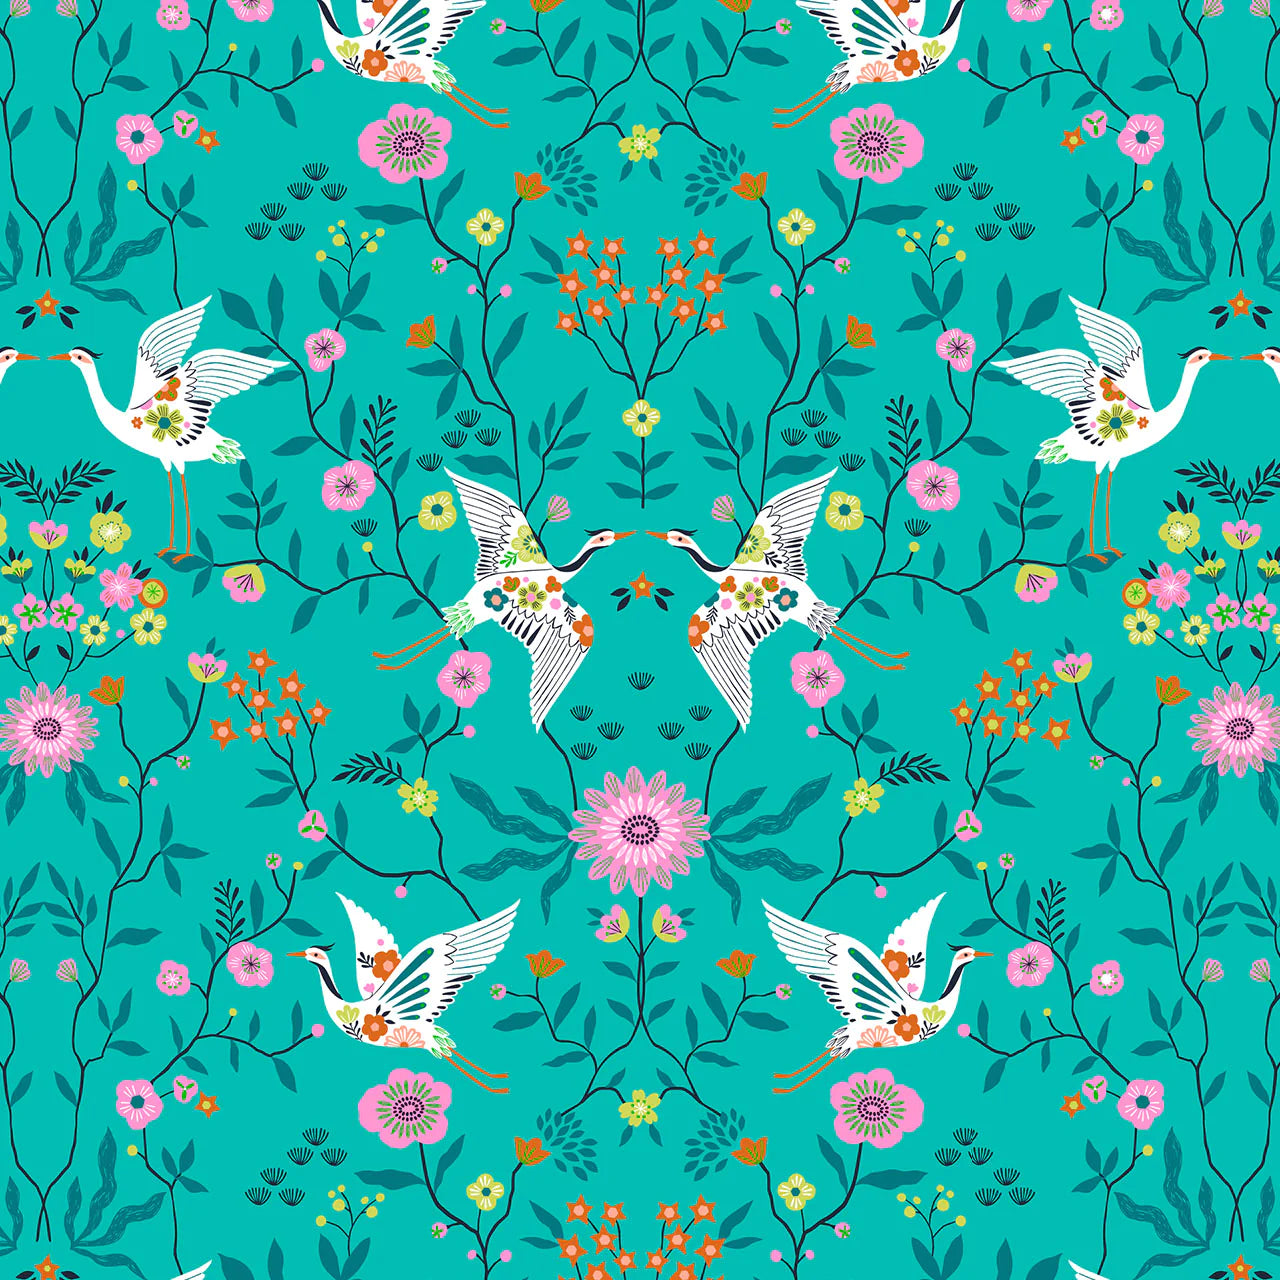 COTTON - Dashwood Studios - Blossom Days - Cranes Turquoise with metallic accents